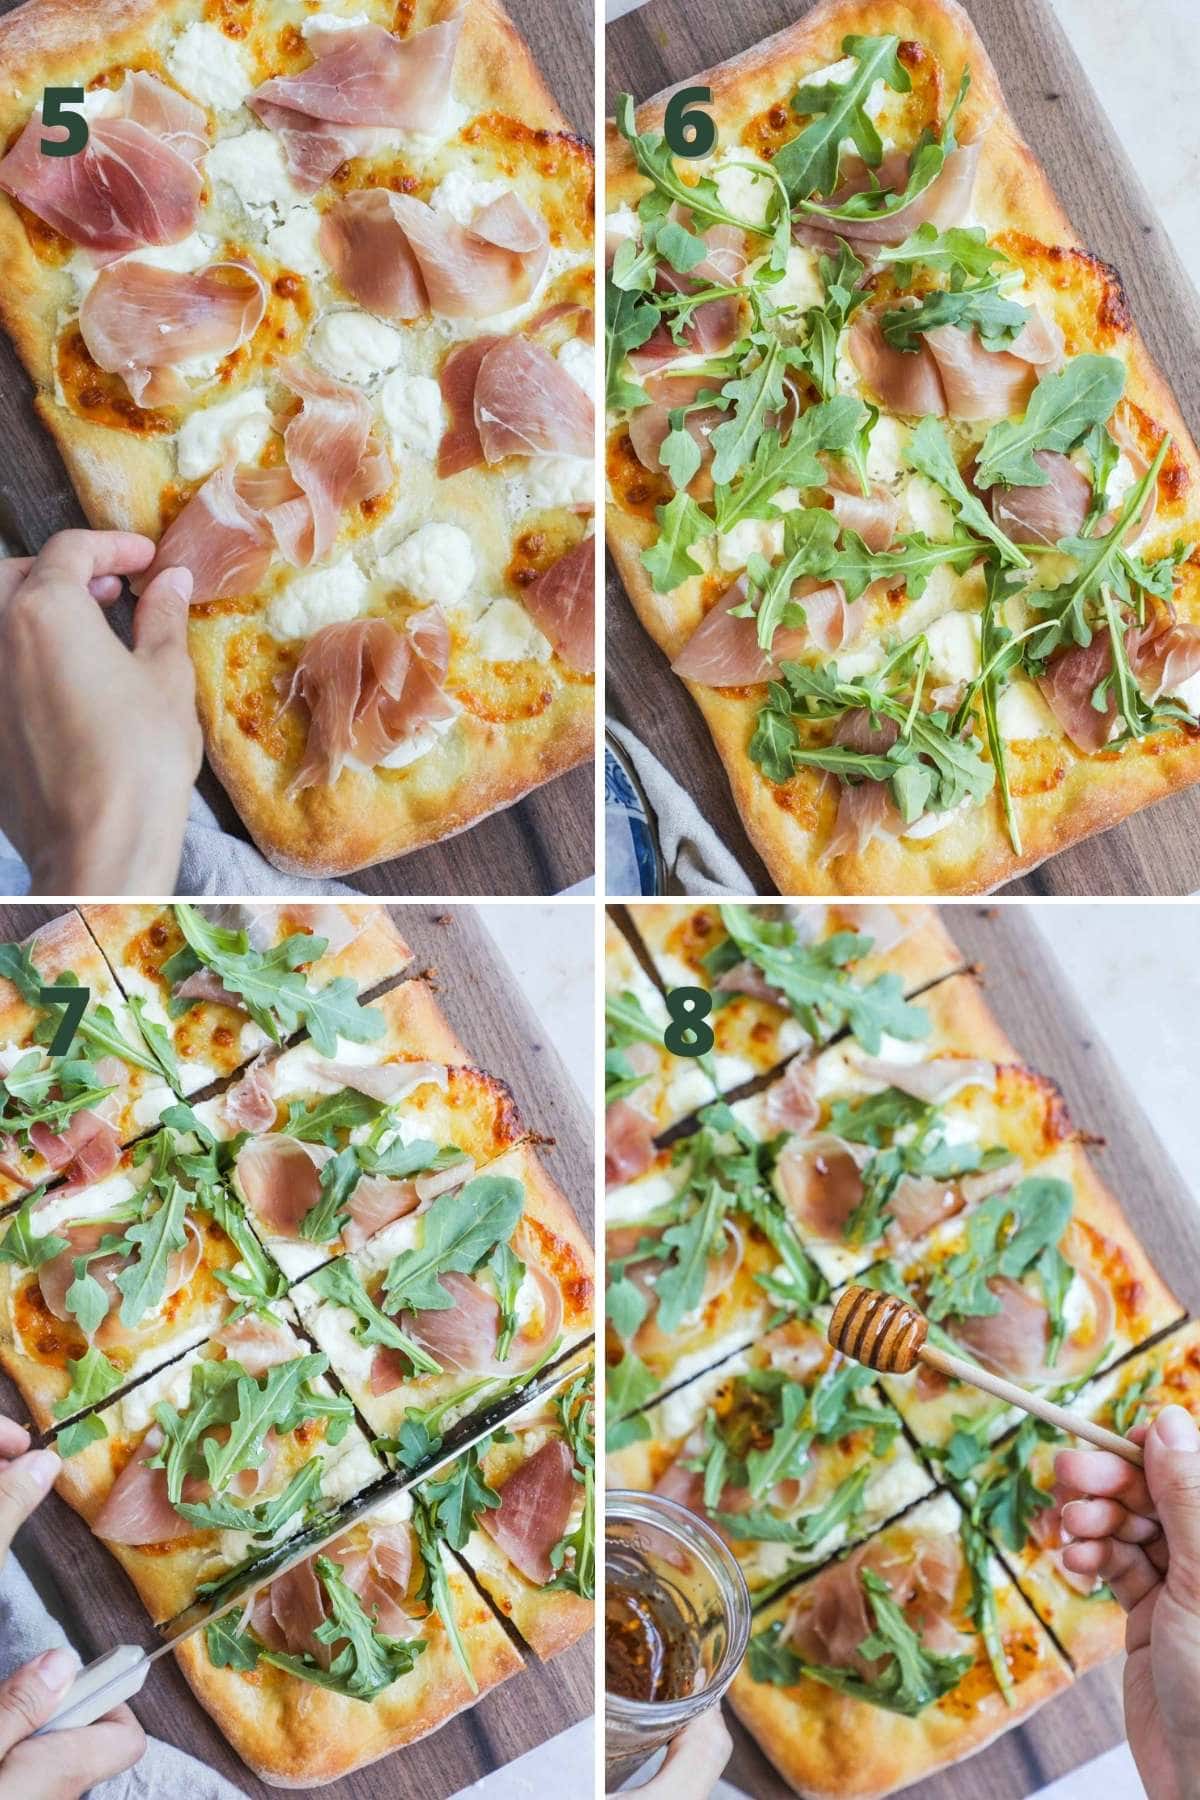 Steps to make pizza with prosciutto and ricotta, including add the prosciutto and arugula, cutting into slices, and drizzling with hot honey.